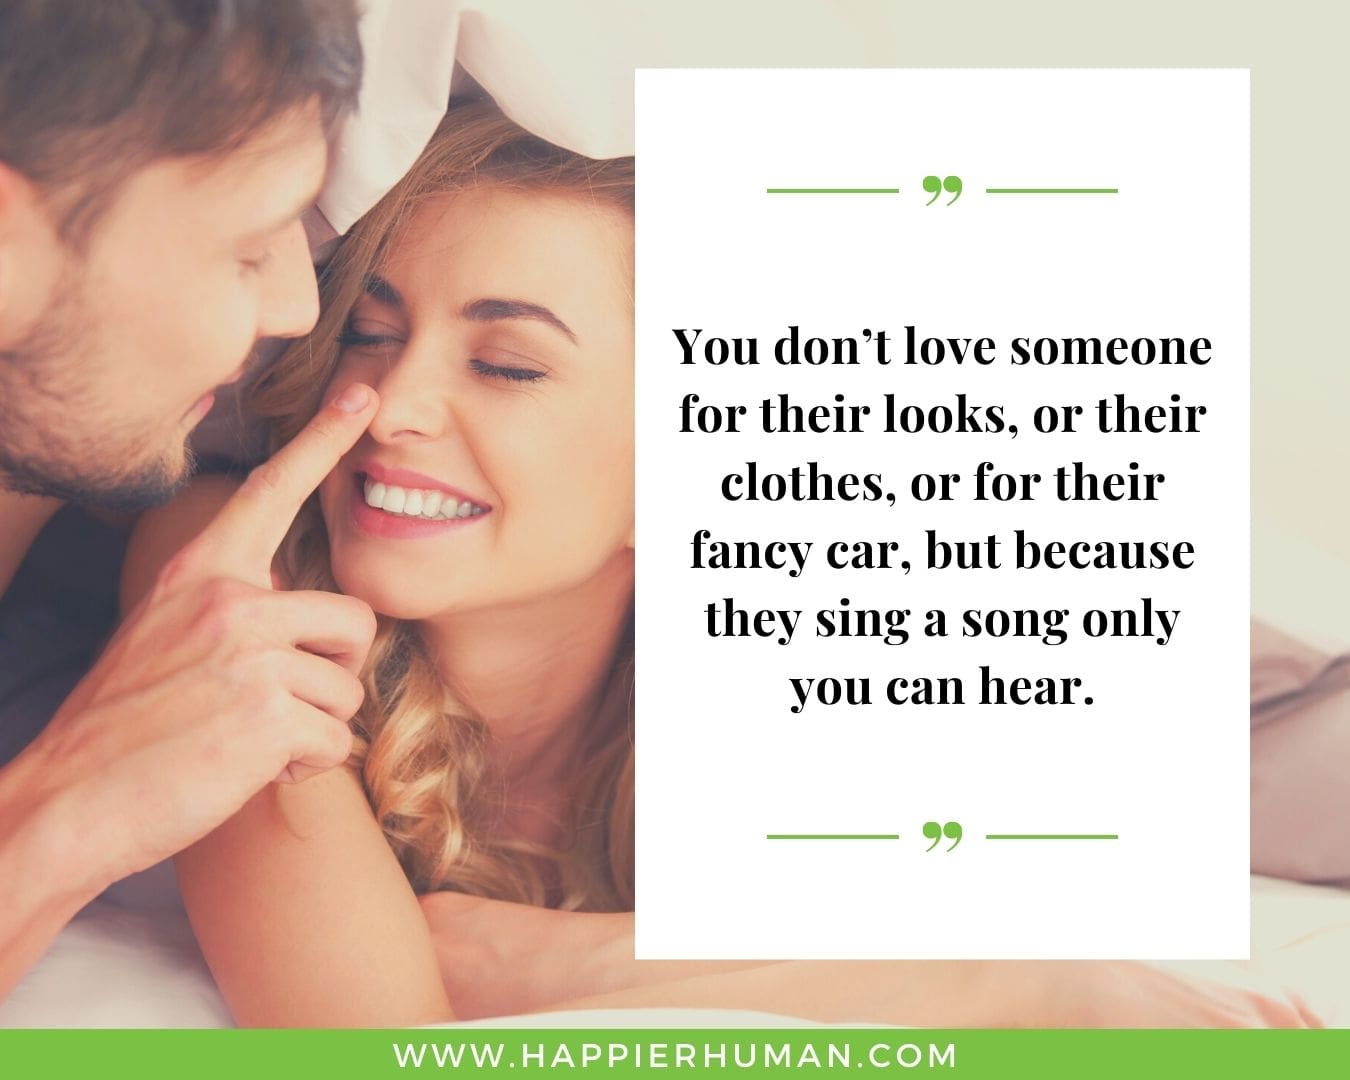 Messages of Love for Women - “You don’t love someone for their looks, or their clothes, or for their fancy car, but because they sing a song only you can hear.”